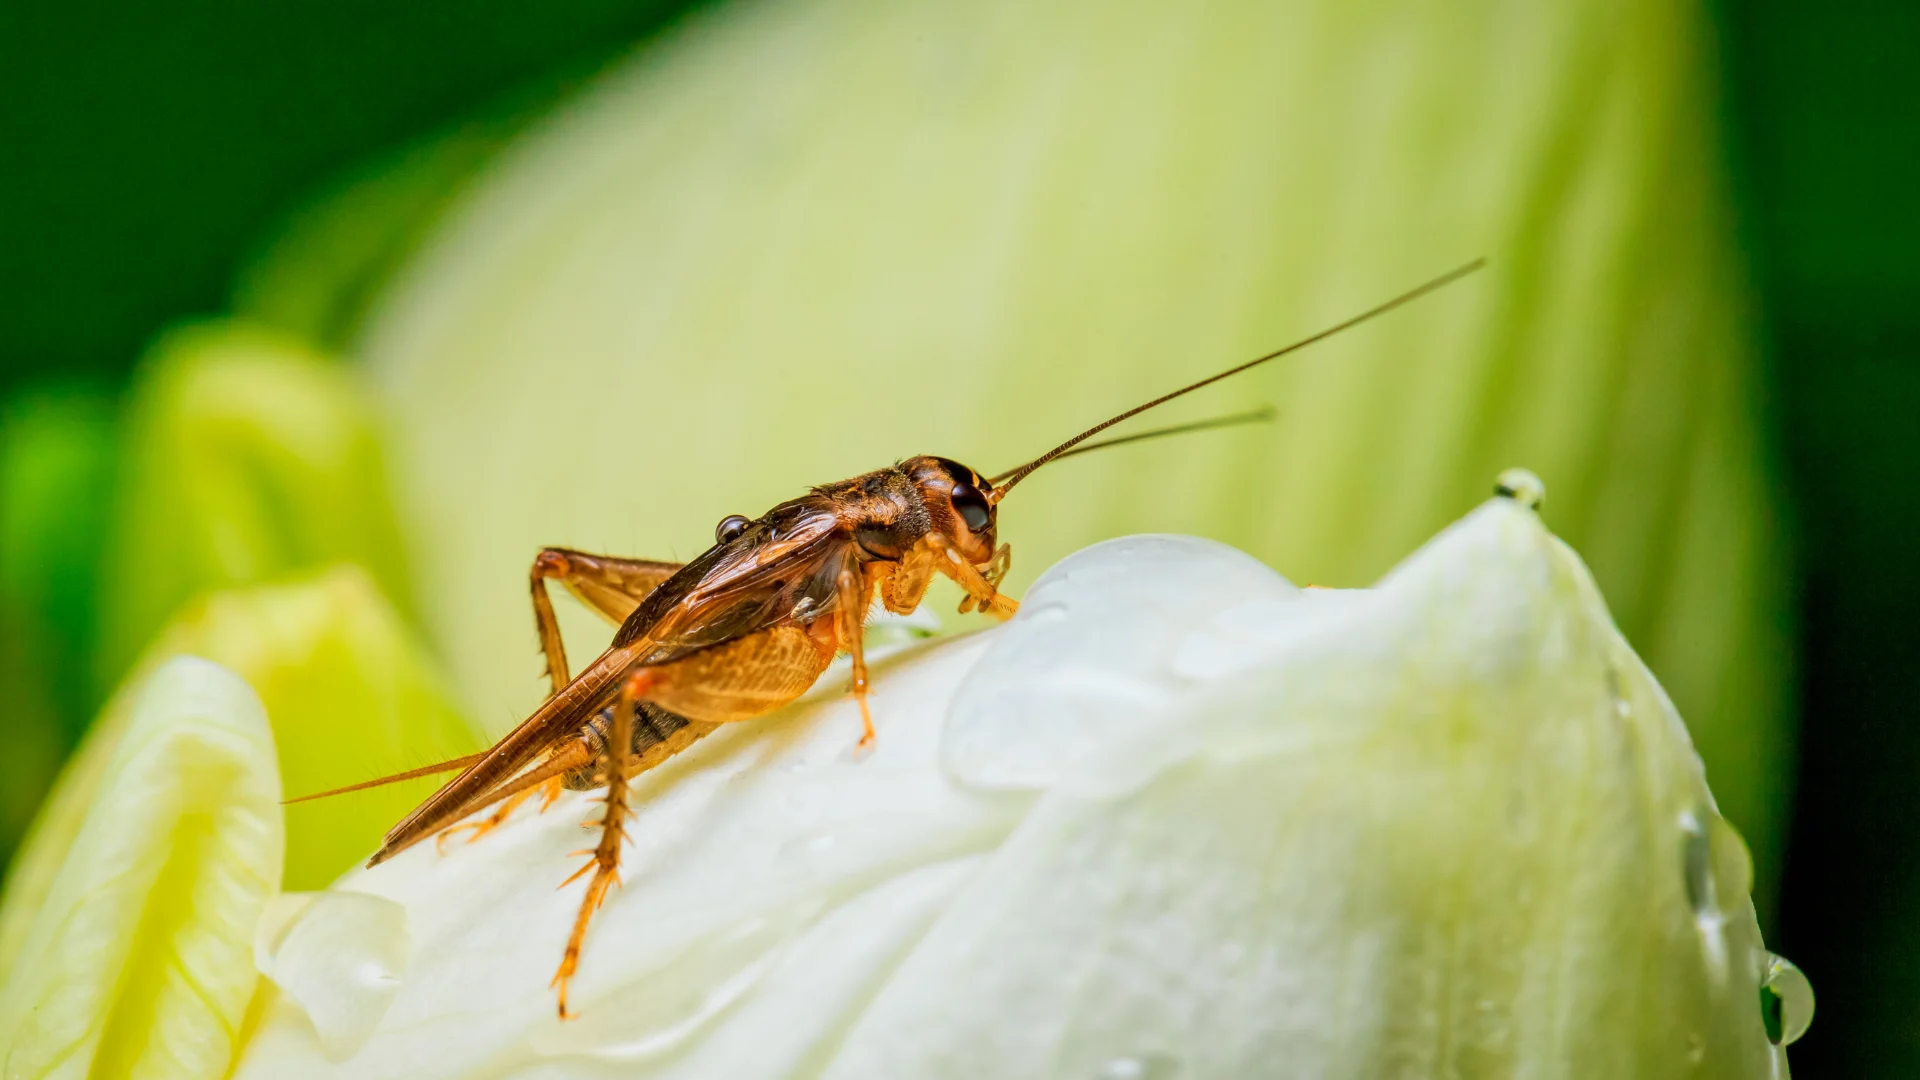 You aren't imagining it: Crickets ARE louder this month